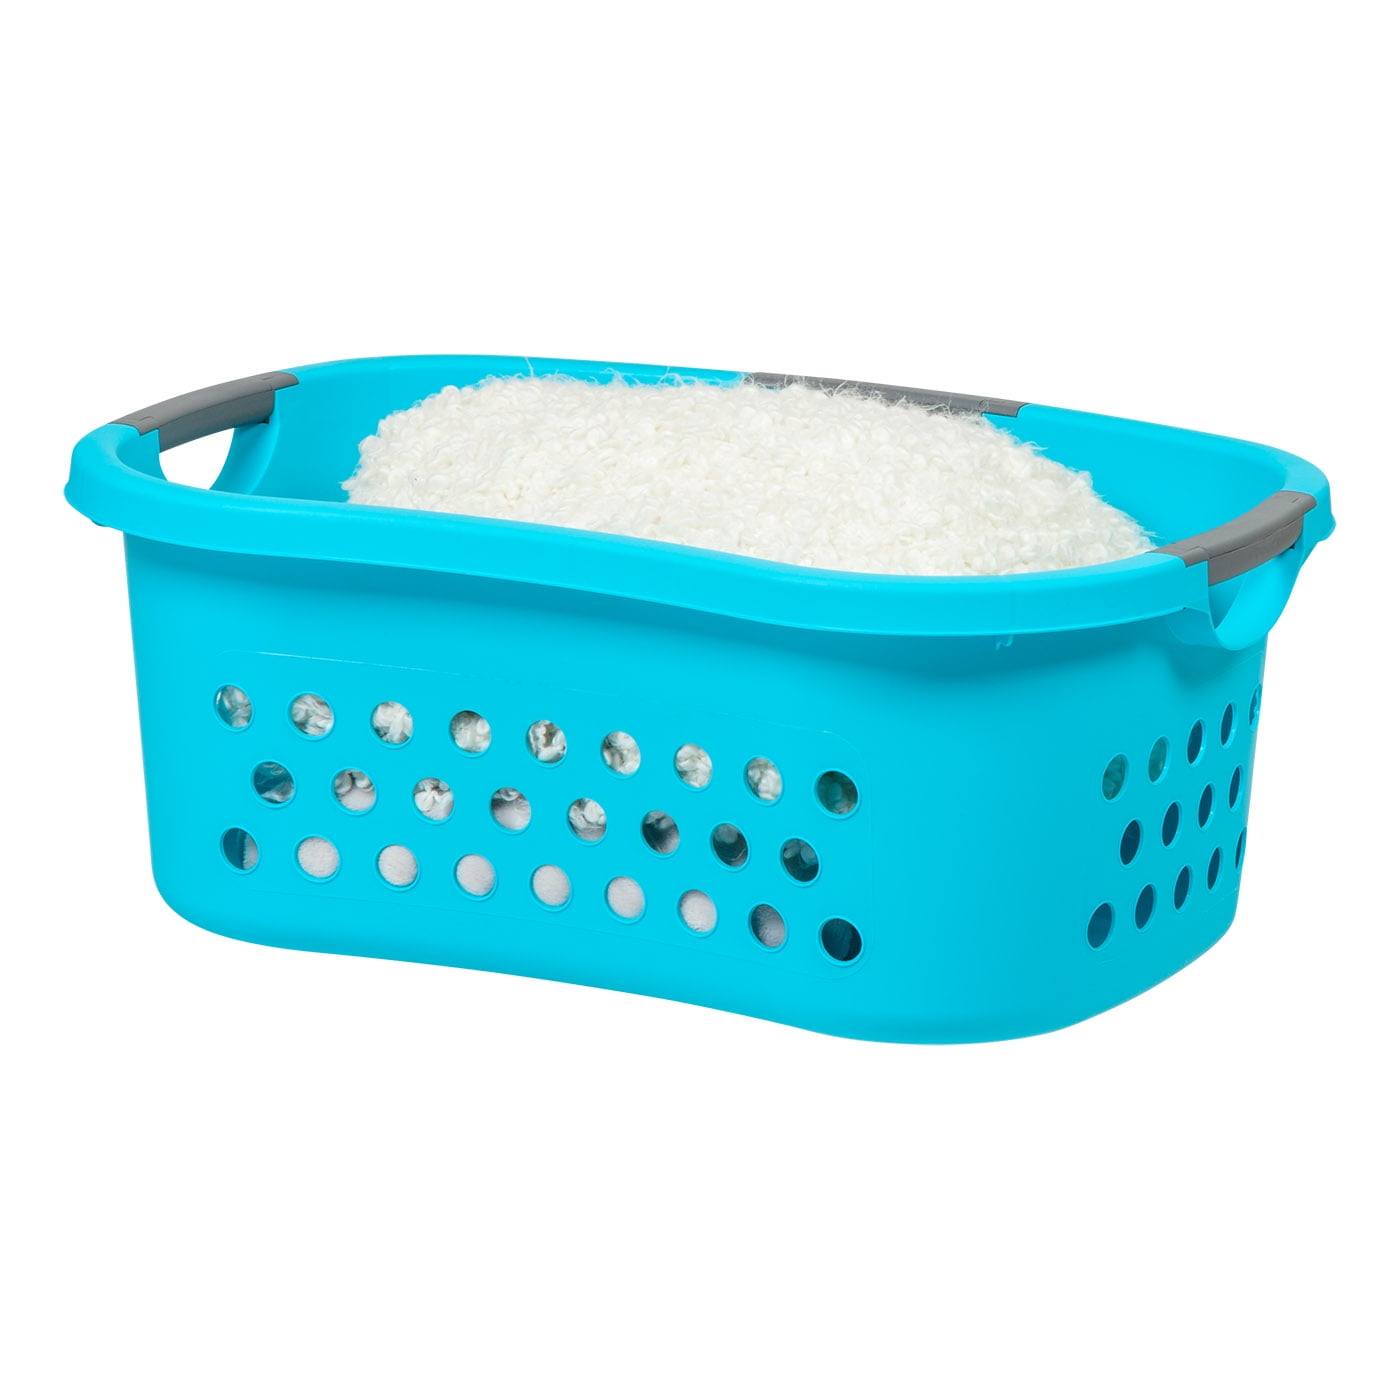 PVC Red Laundry Basket, Size: 3ft(h)